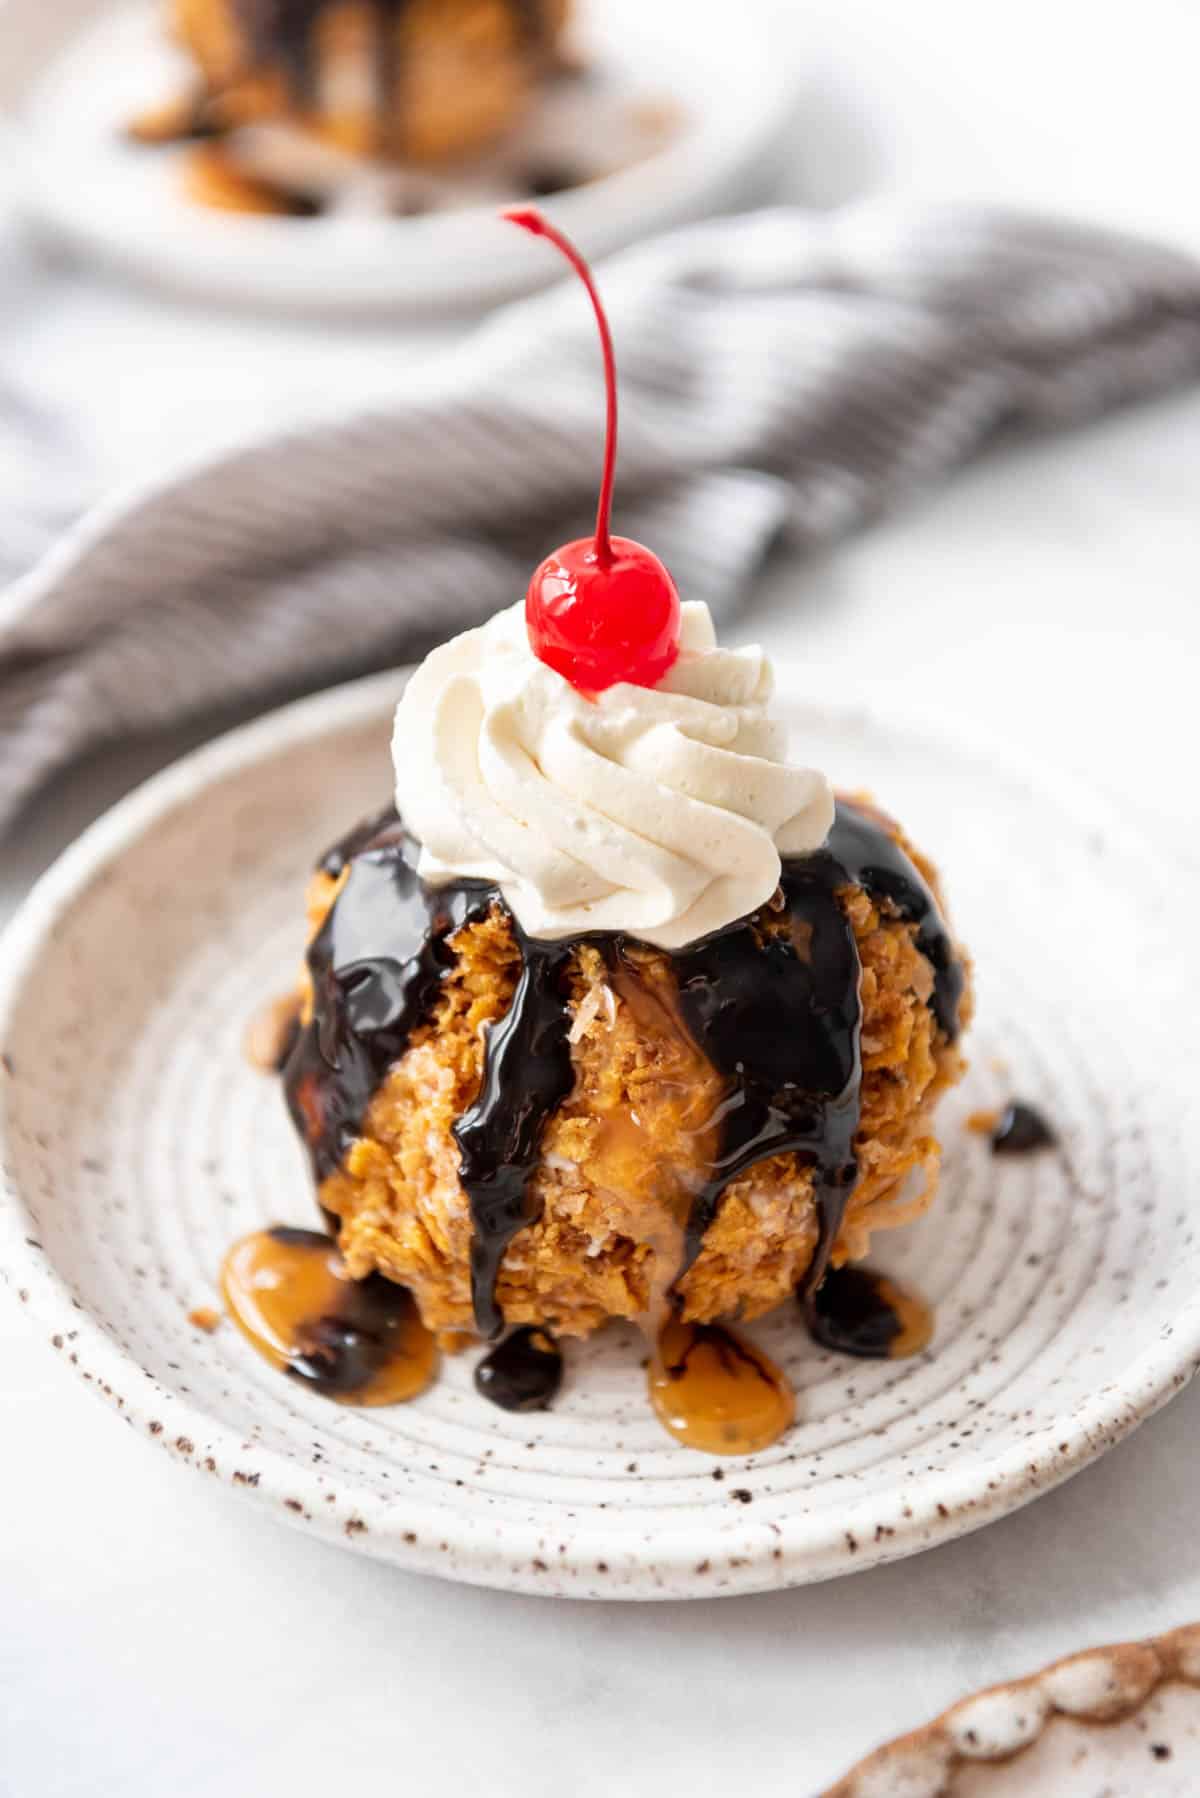 Homemade easy fried ice cream on a plate with chocolate sauce, whipped cream, and a cherry.